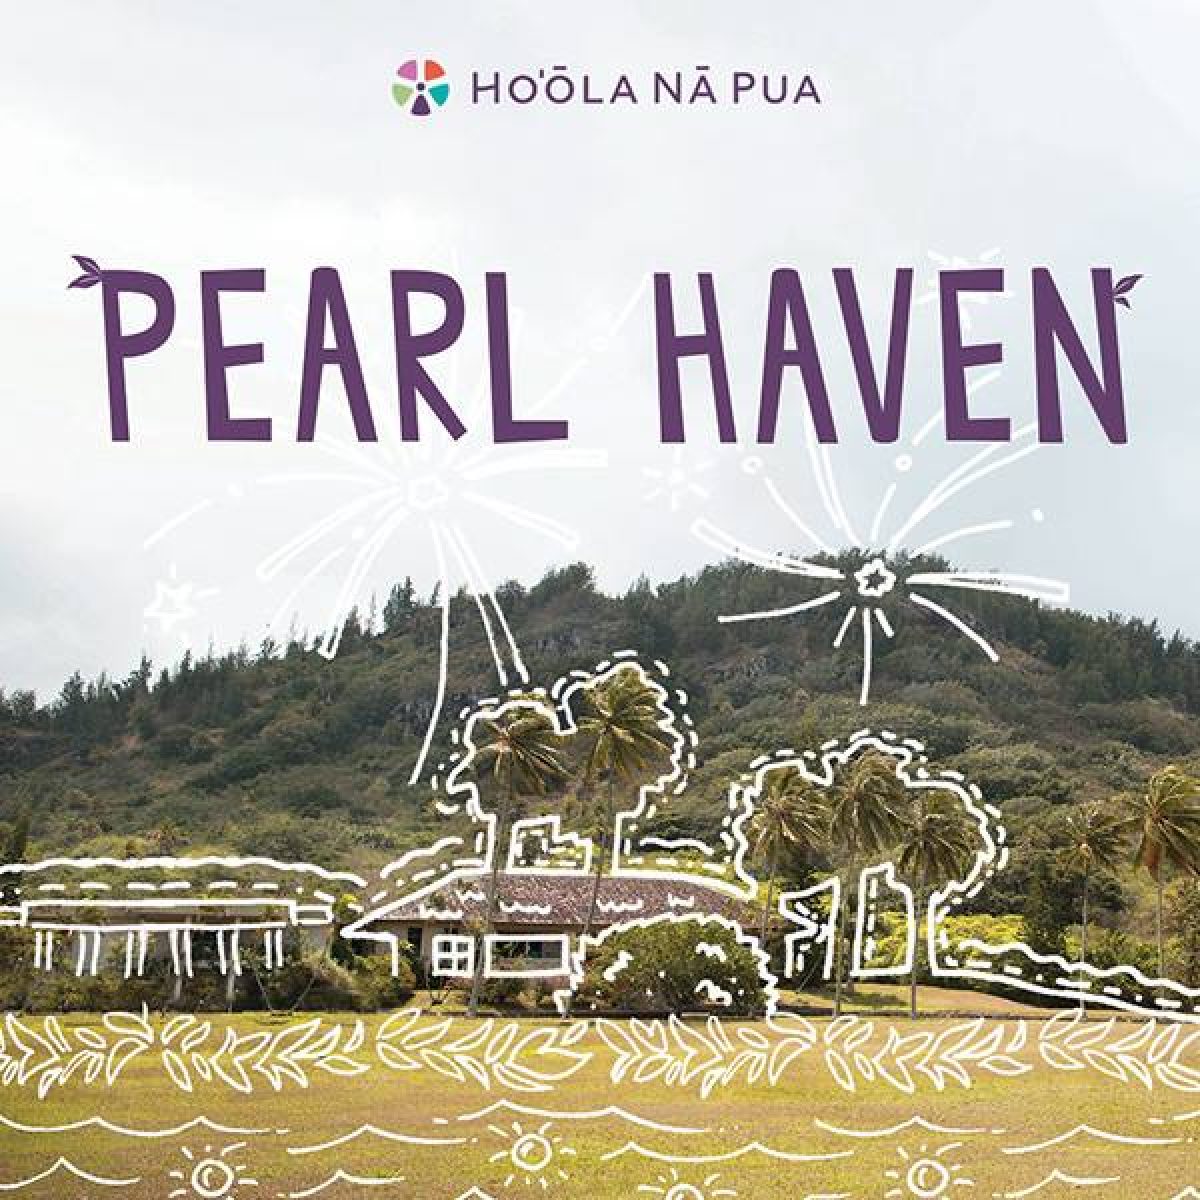 pearl-haven-sexual-exploitation-rescue-sex-trafficking-girls-hawaii